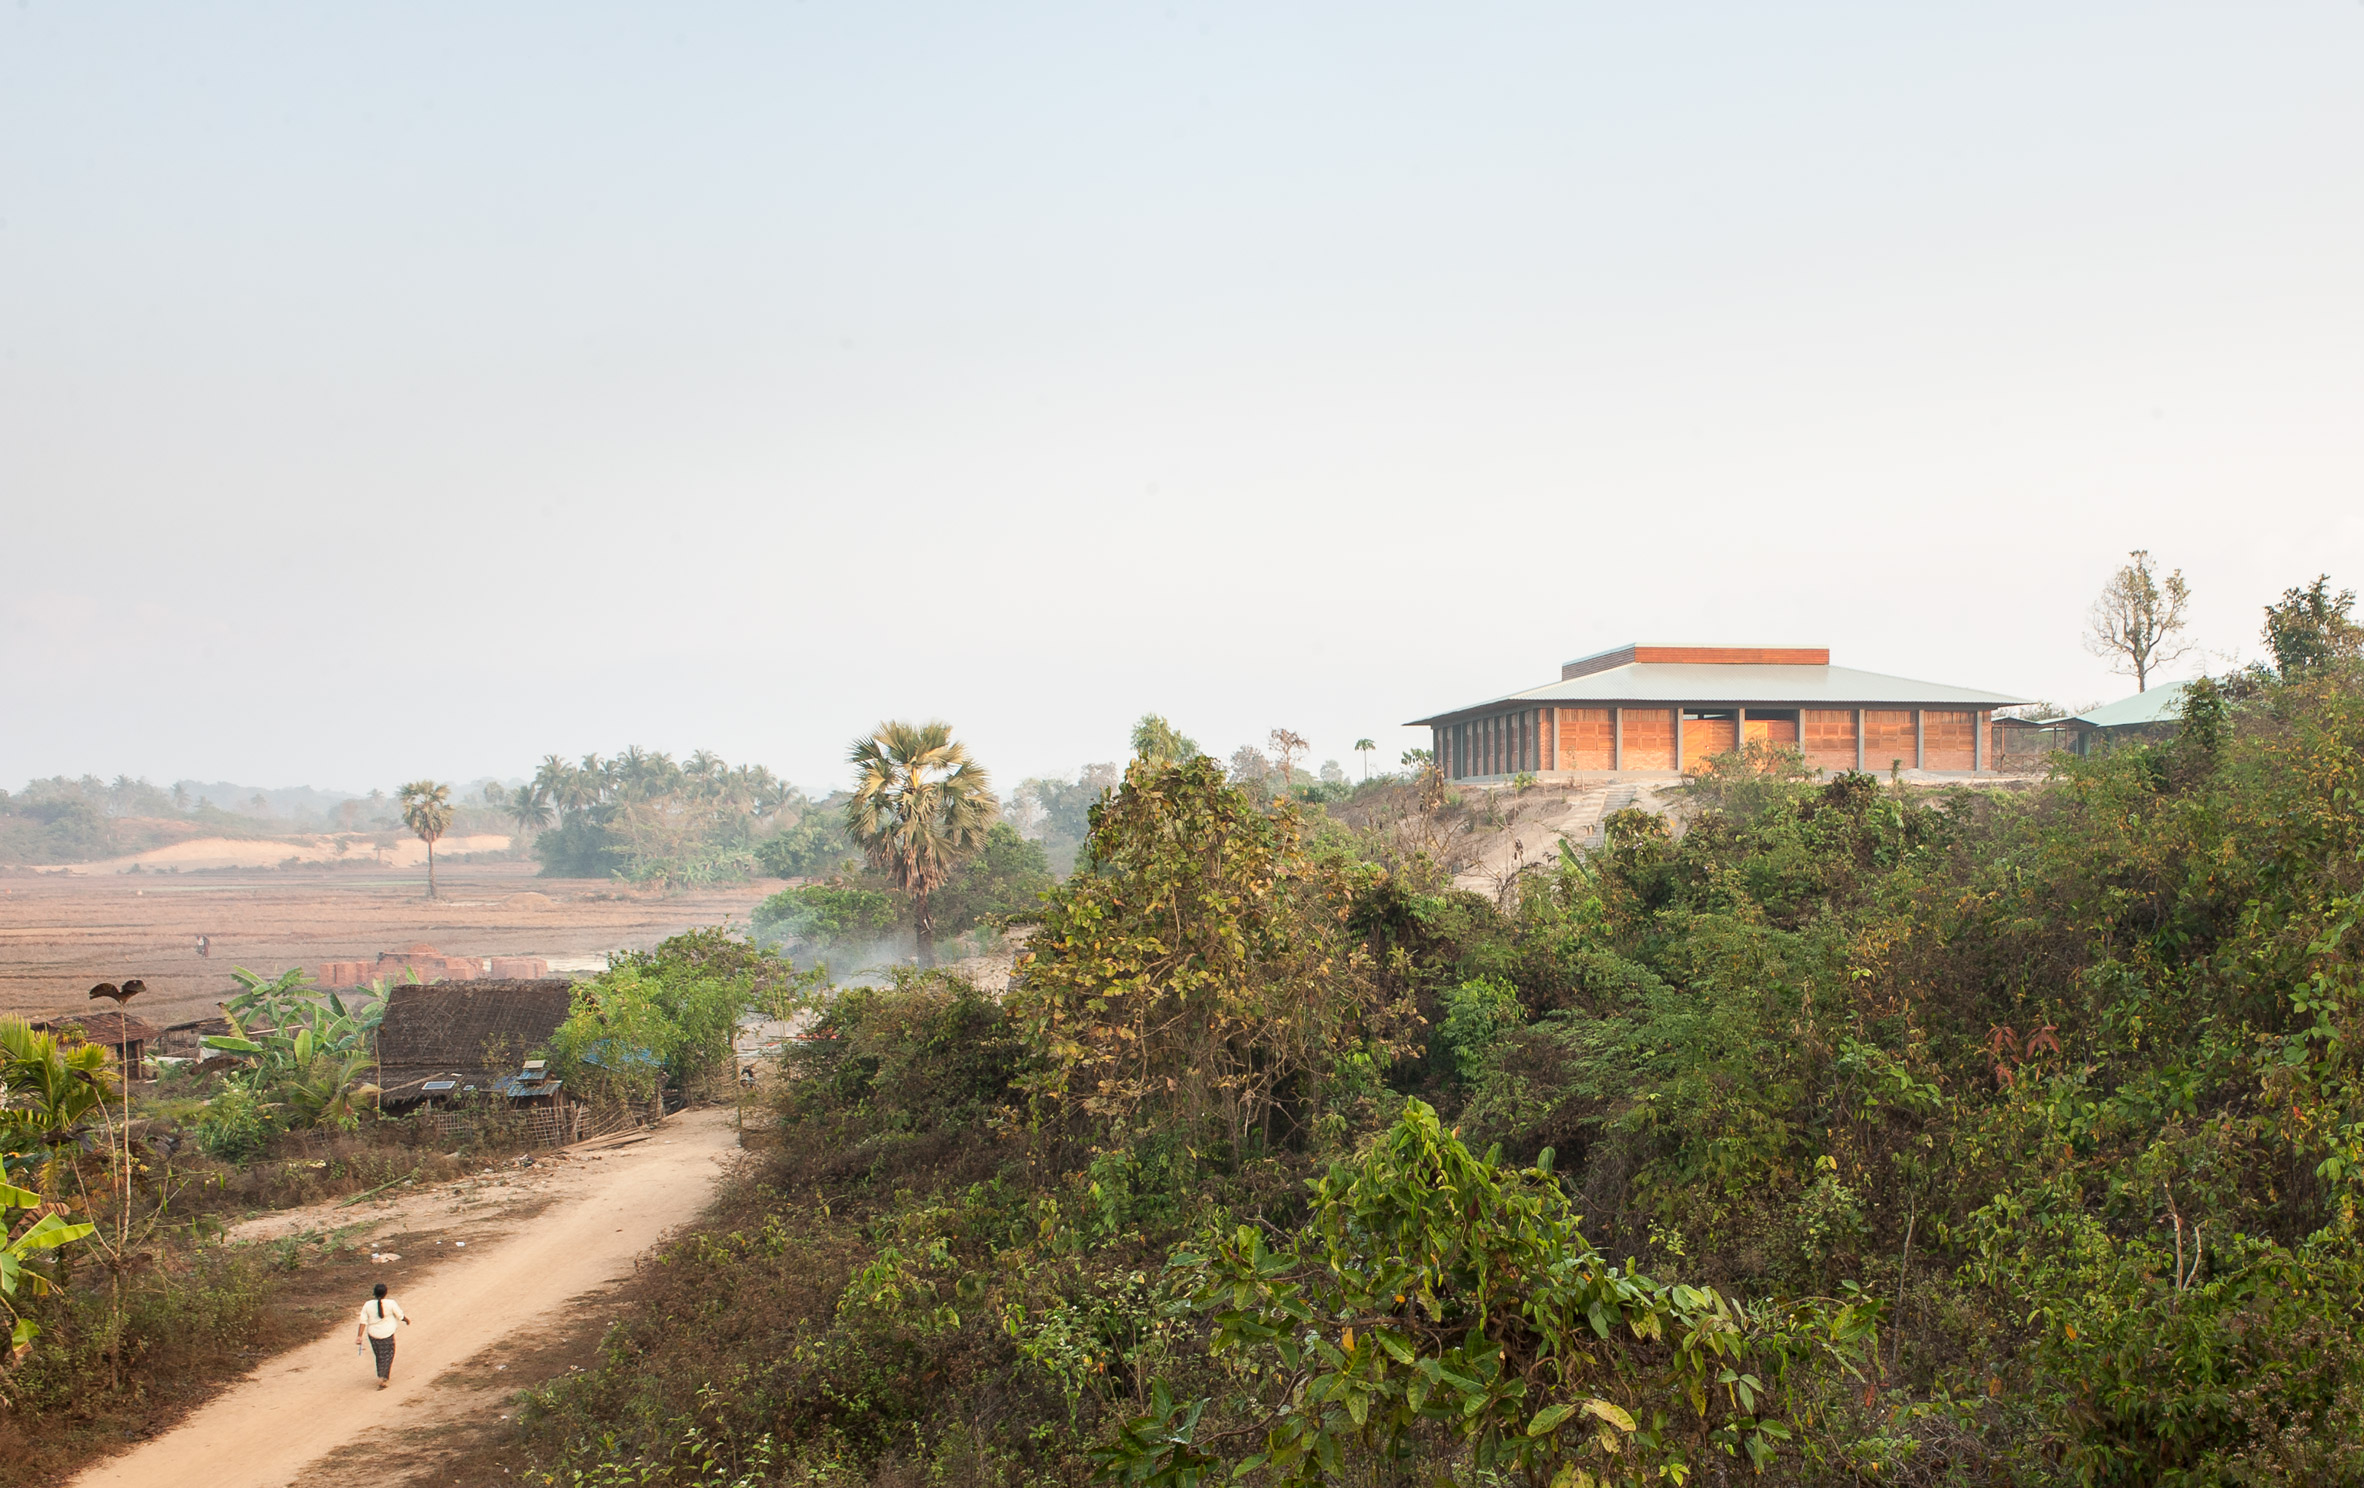 Project Burma Hospital by A+R Architekten on forested hill in Myanmar